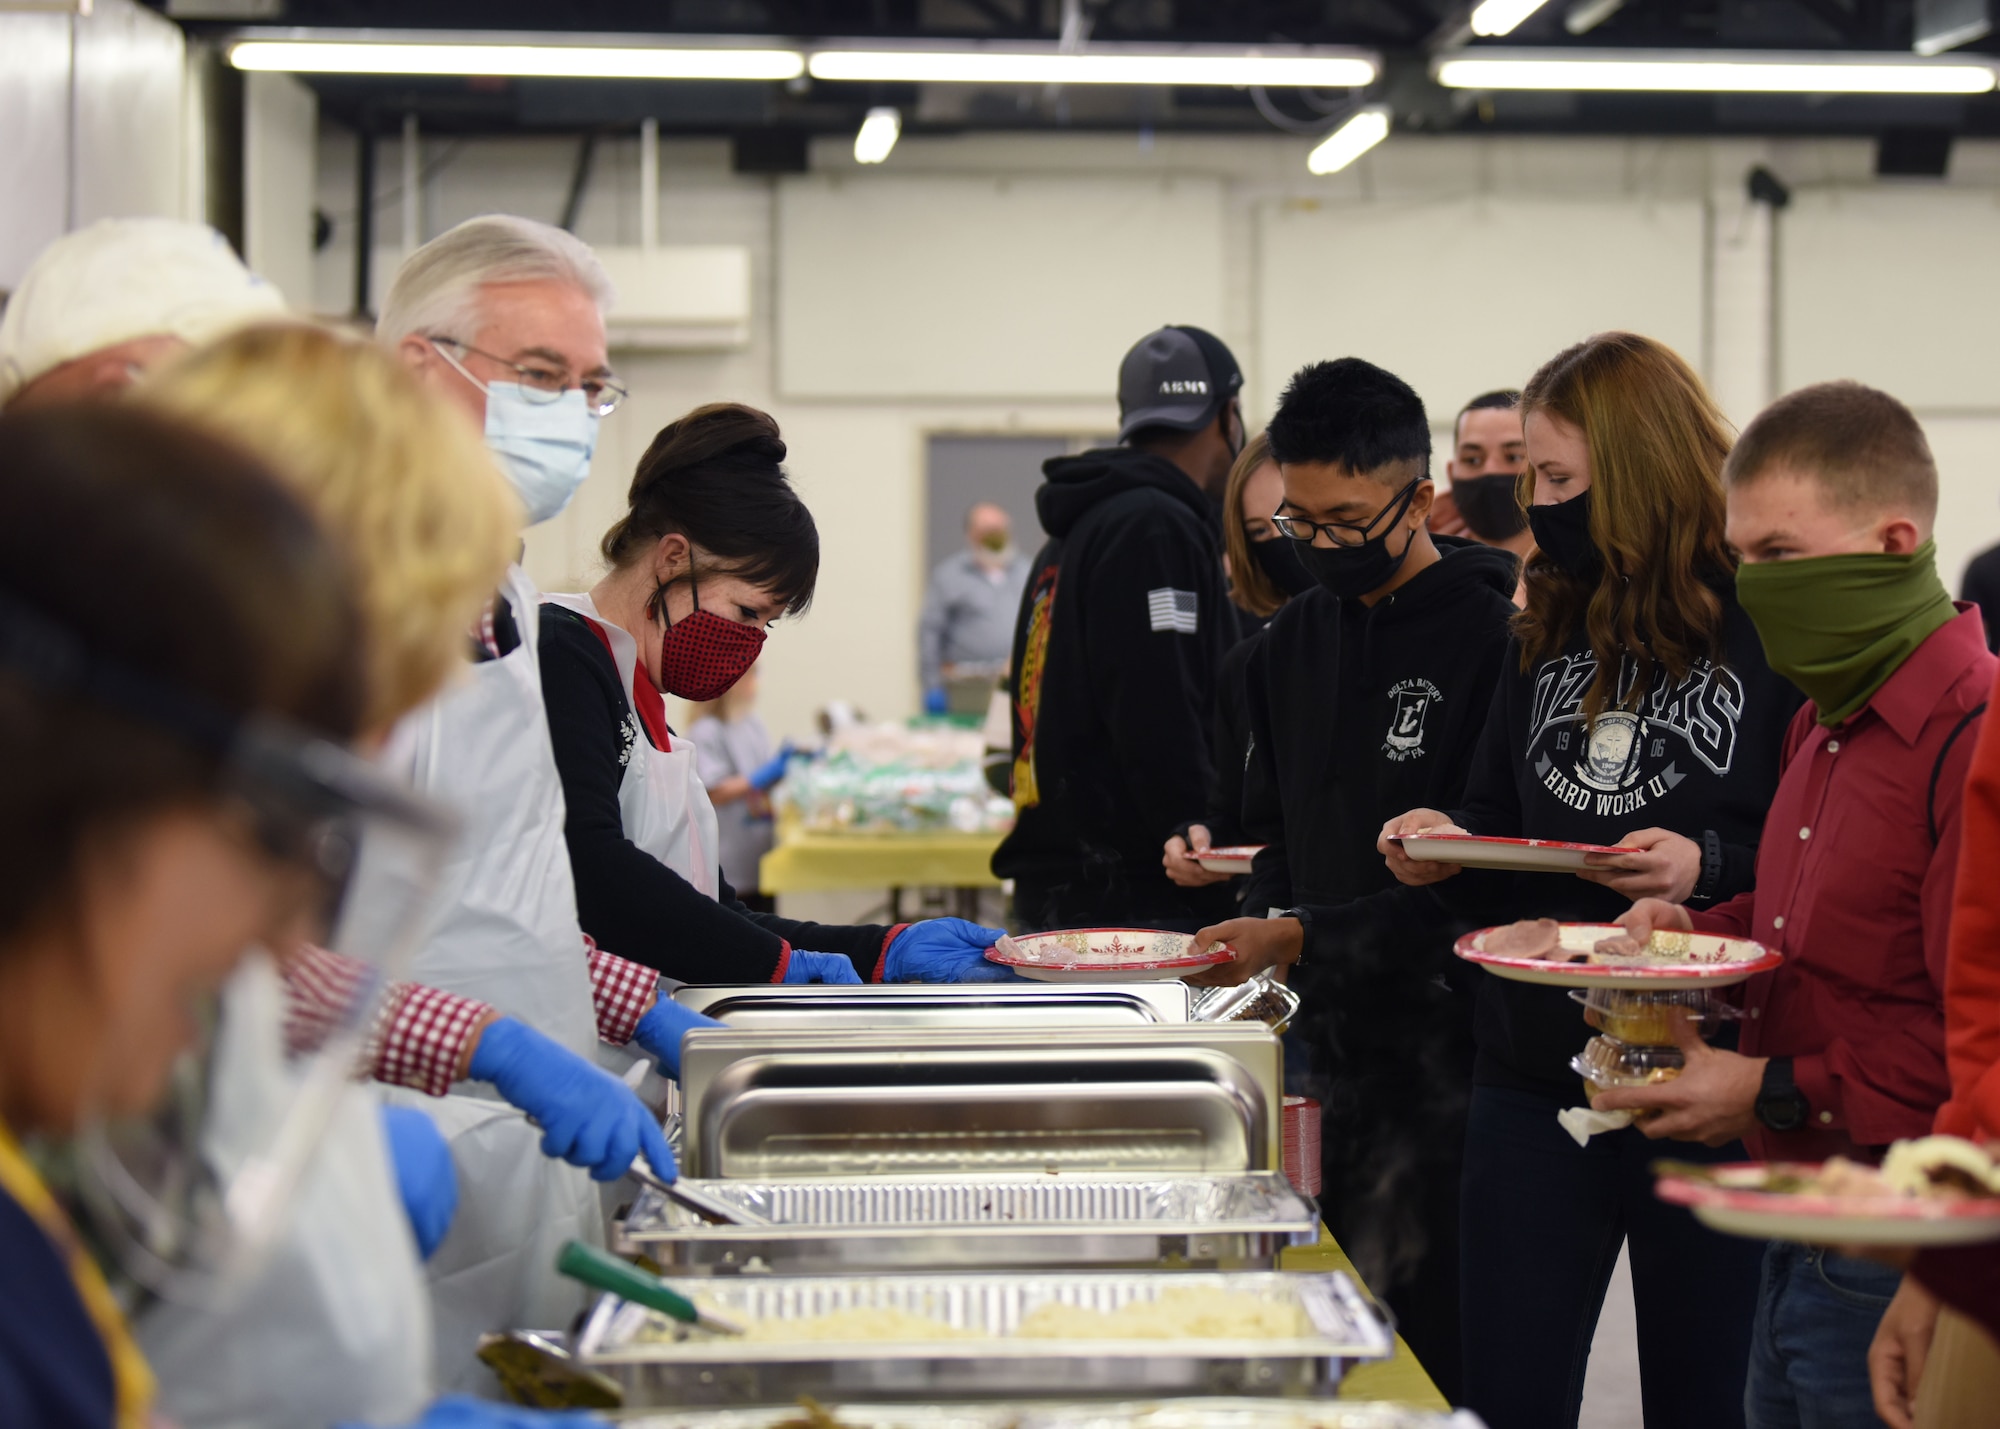 Volunteers serve food to military members at the Home Away From Home event in the First Financial Pavilion in San Angelo, Texas, Dec. 25, 2020. Drinks, desserts, and traditional holiday foods were served to over 60 individuals. (U.S. Air Force photo by Airman 1st Class Ethan Sherwood)